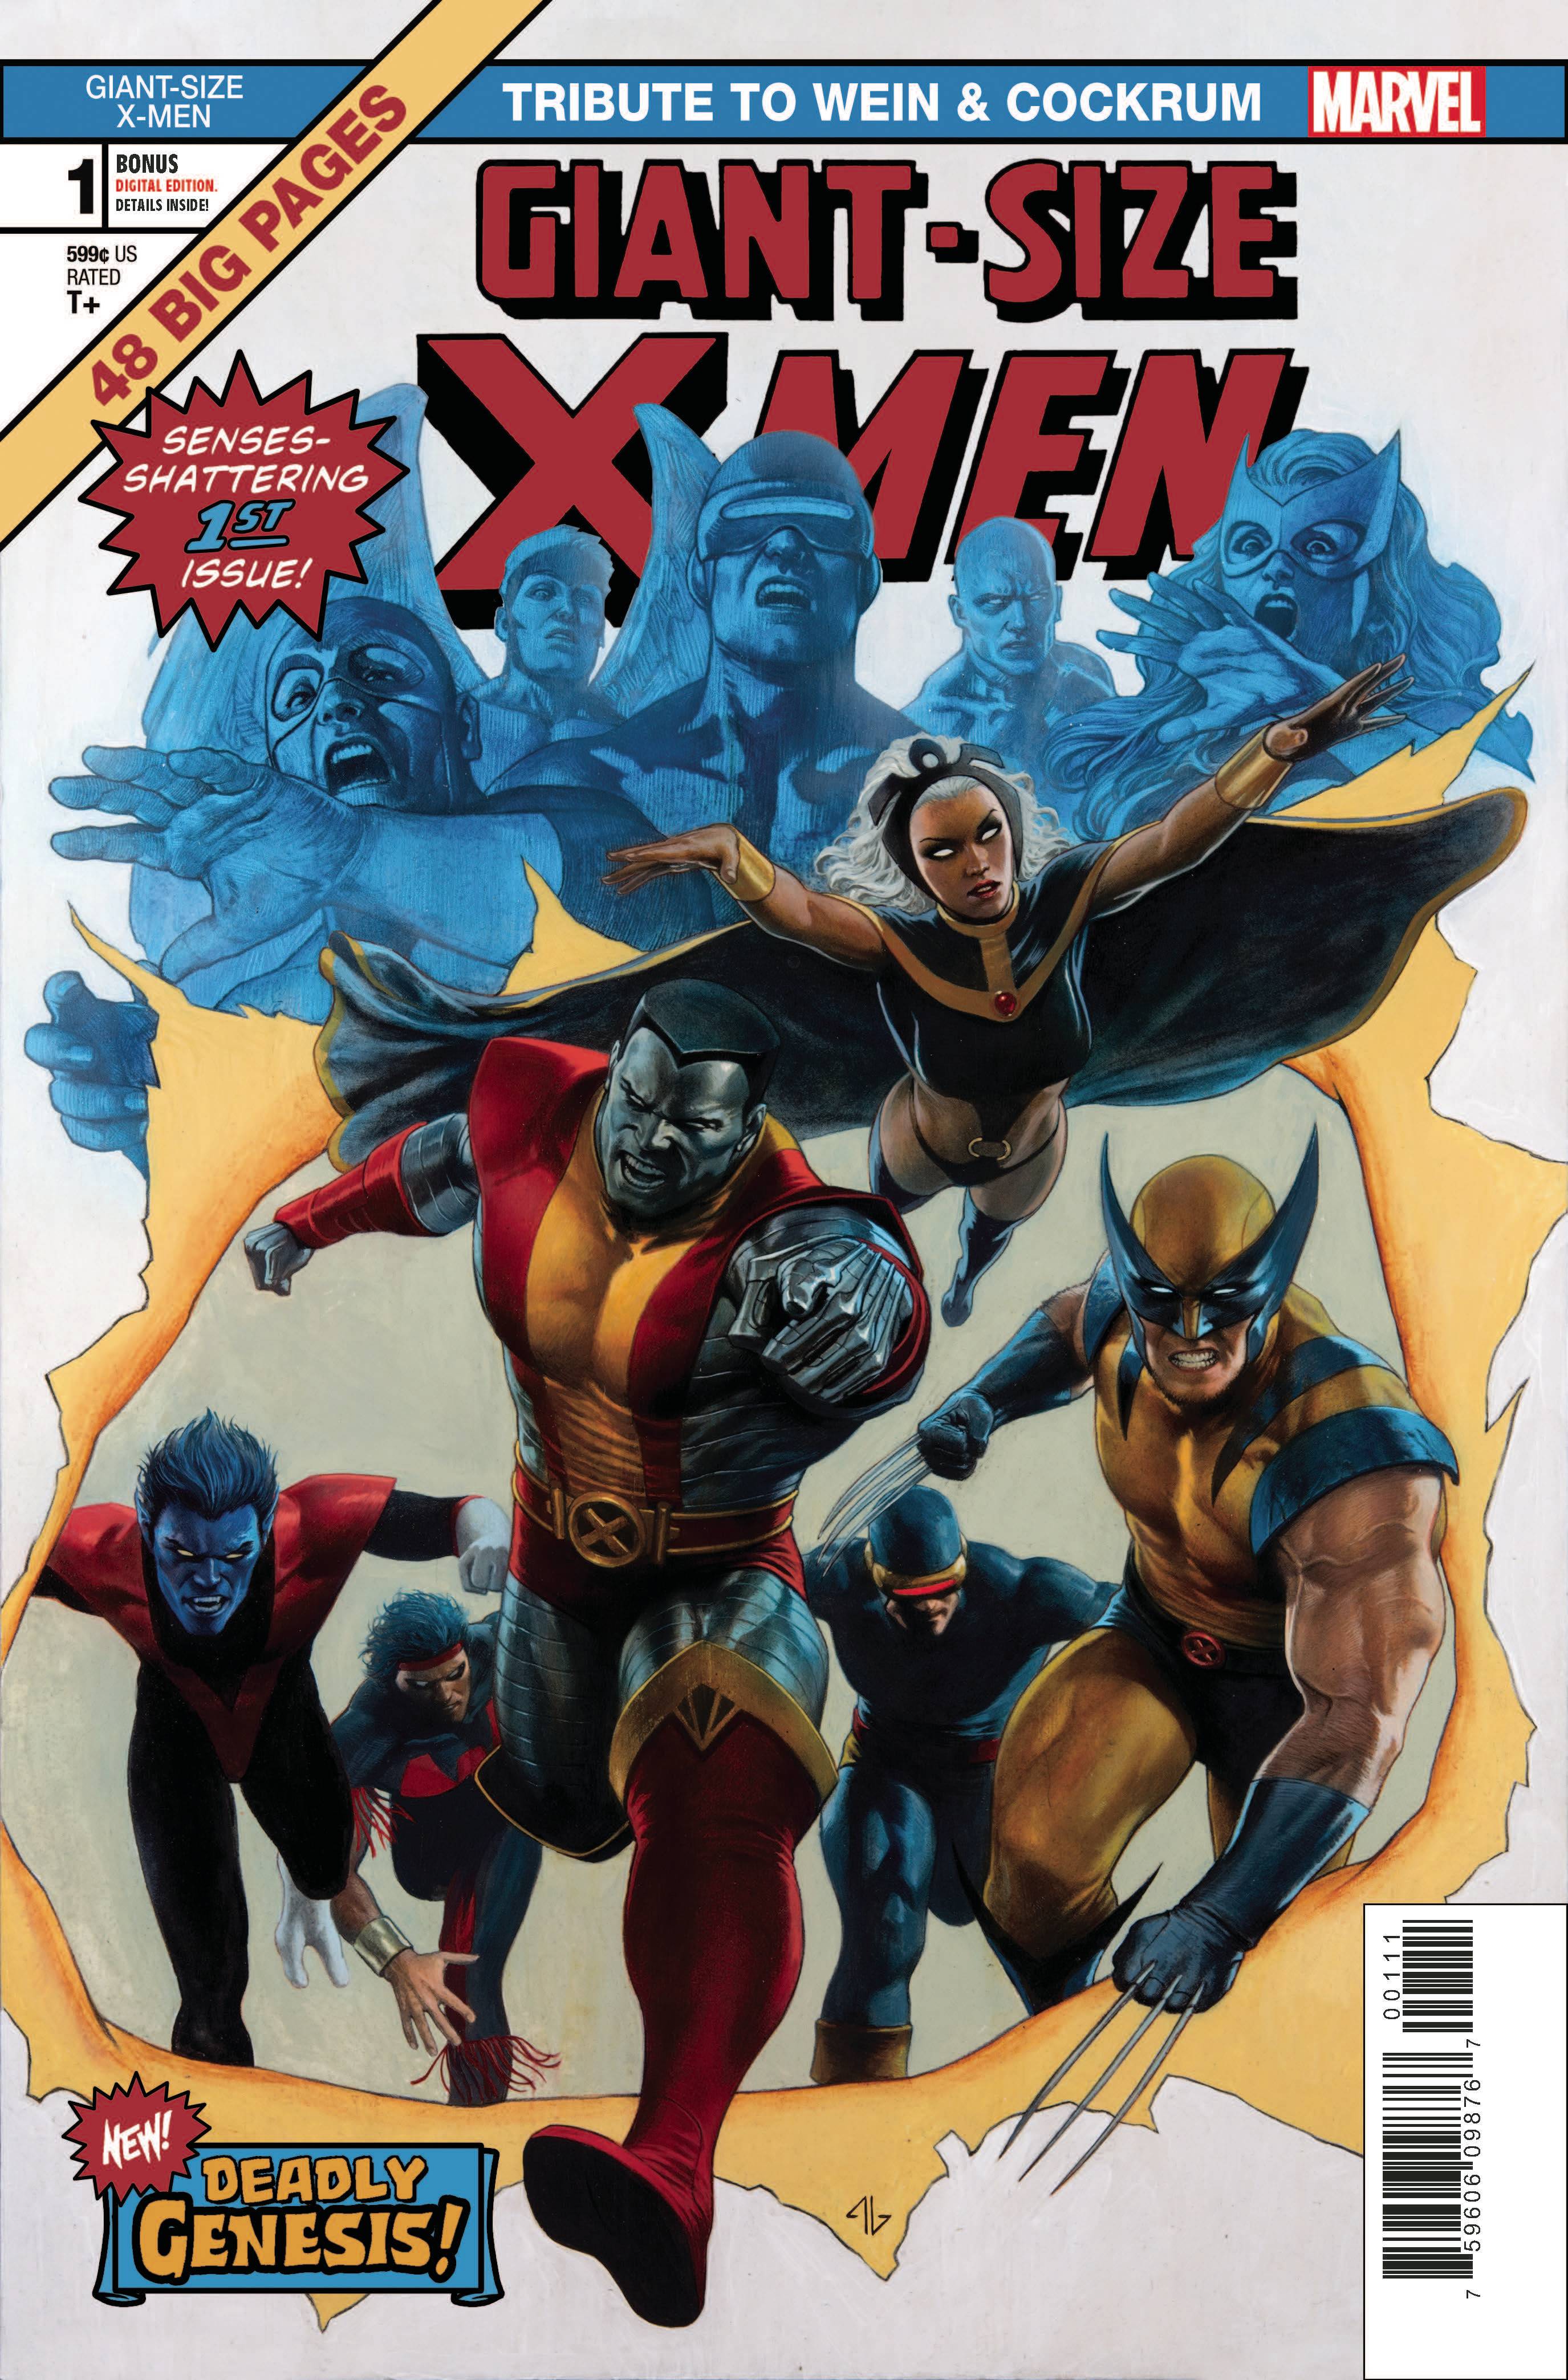 Giant Size X-Men Tribute To Wein And Cockrum #1